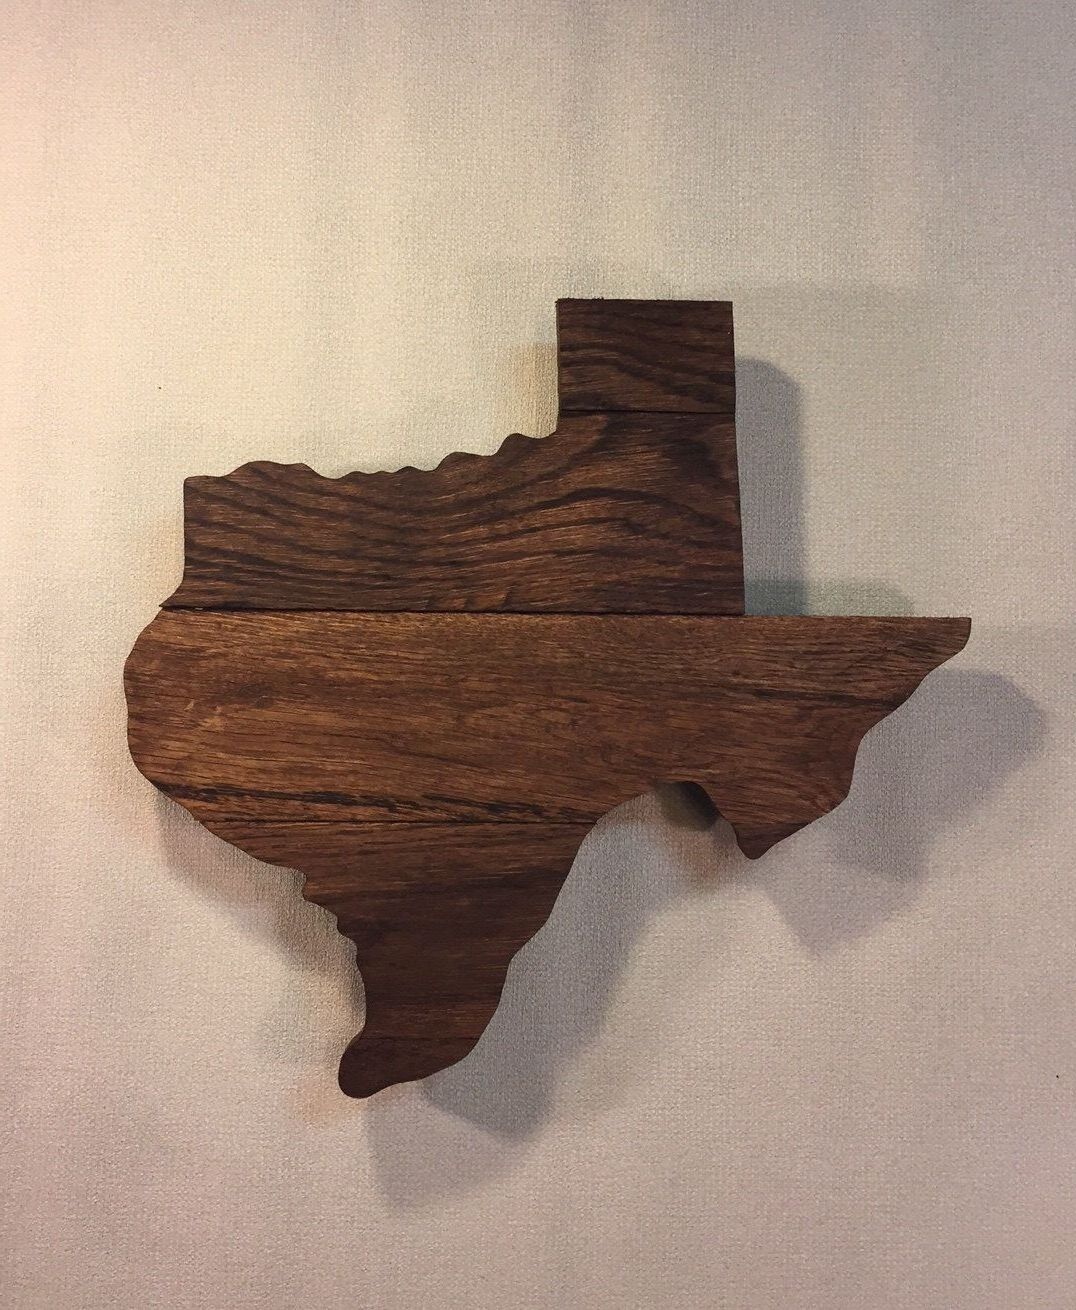 2017 Texas Wall Art In Texas State Wood Sign, Texas Sign, Texas Home Decor, Texas Reclaimed (View 6 of 20)